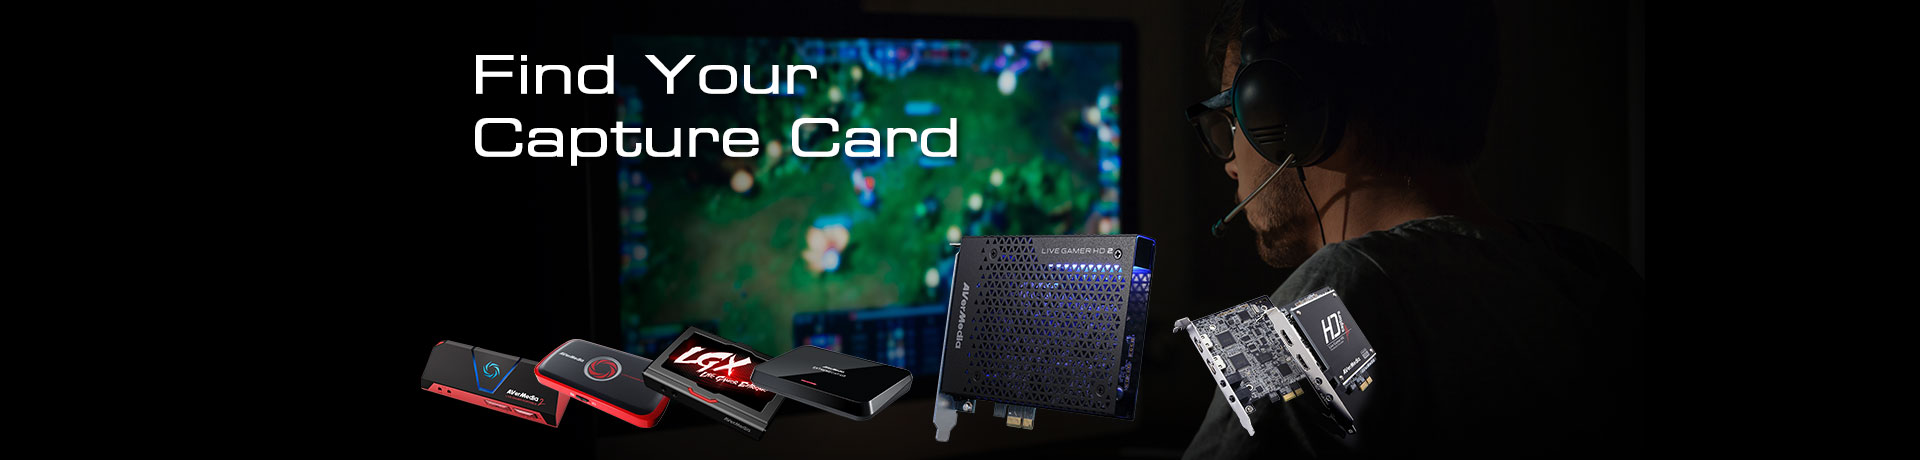 Find Your Capture Card